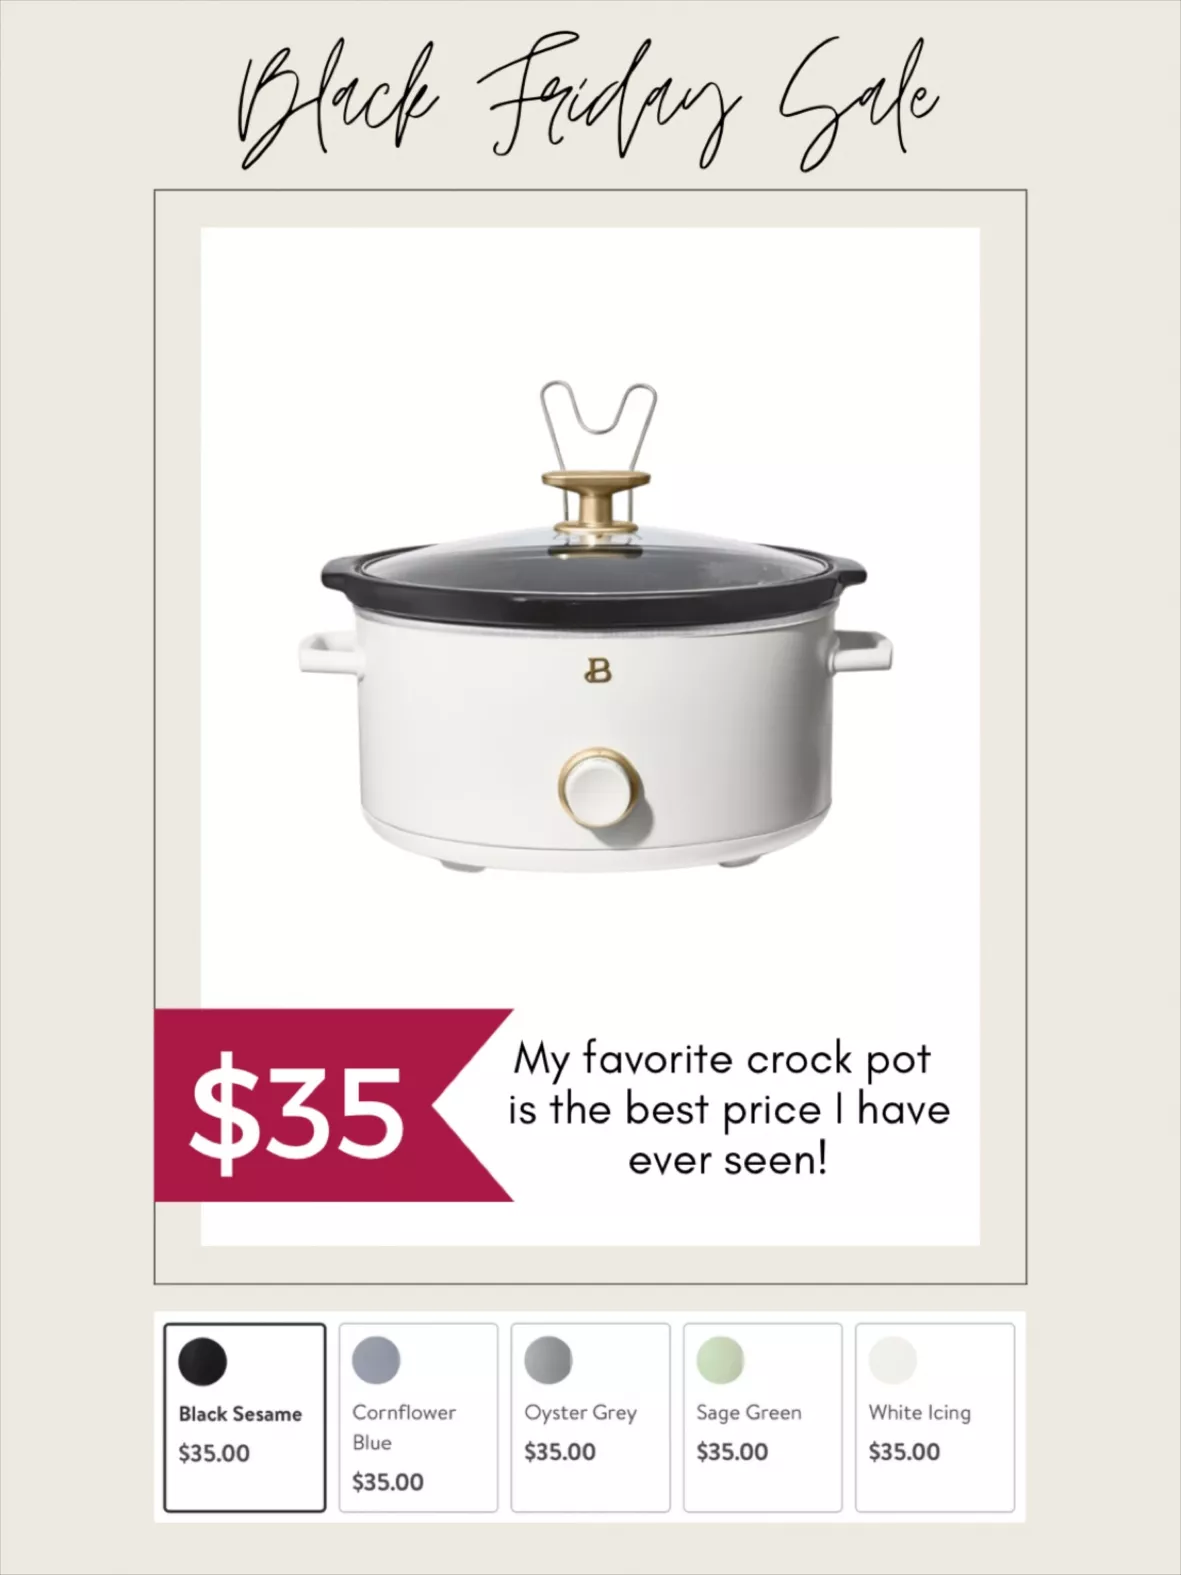 Drew Barrymore's cookware line just marked its slow cooker down to only $35